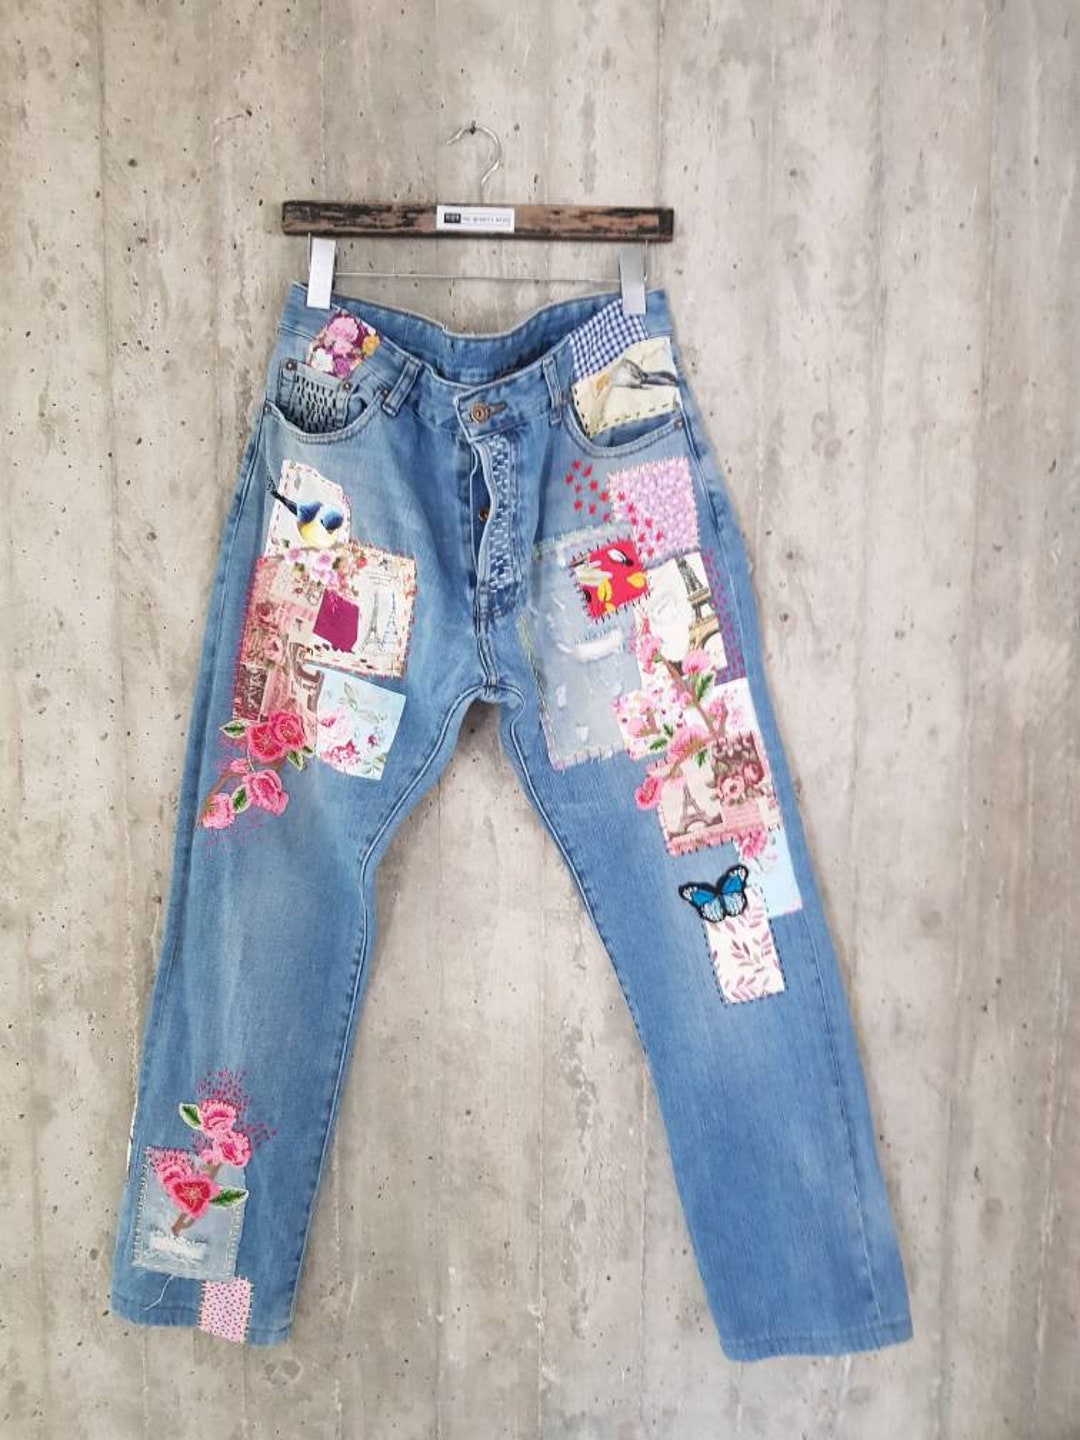 Vintage Jean's, Embroidery Jeans All SIZES - Etsy